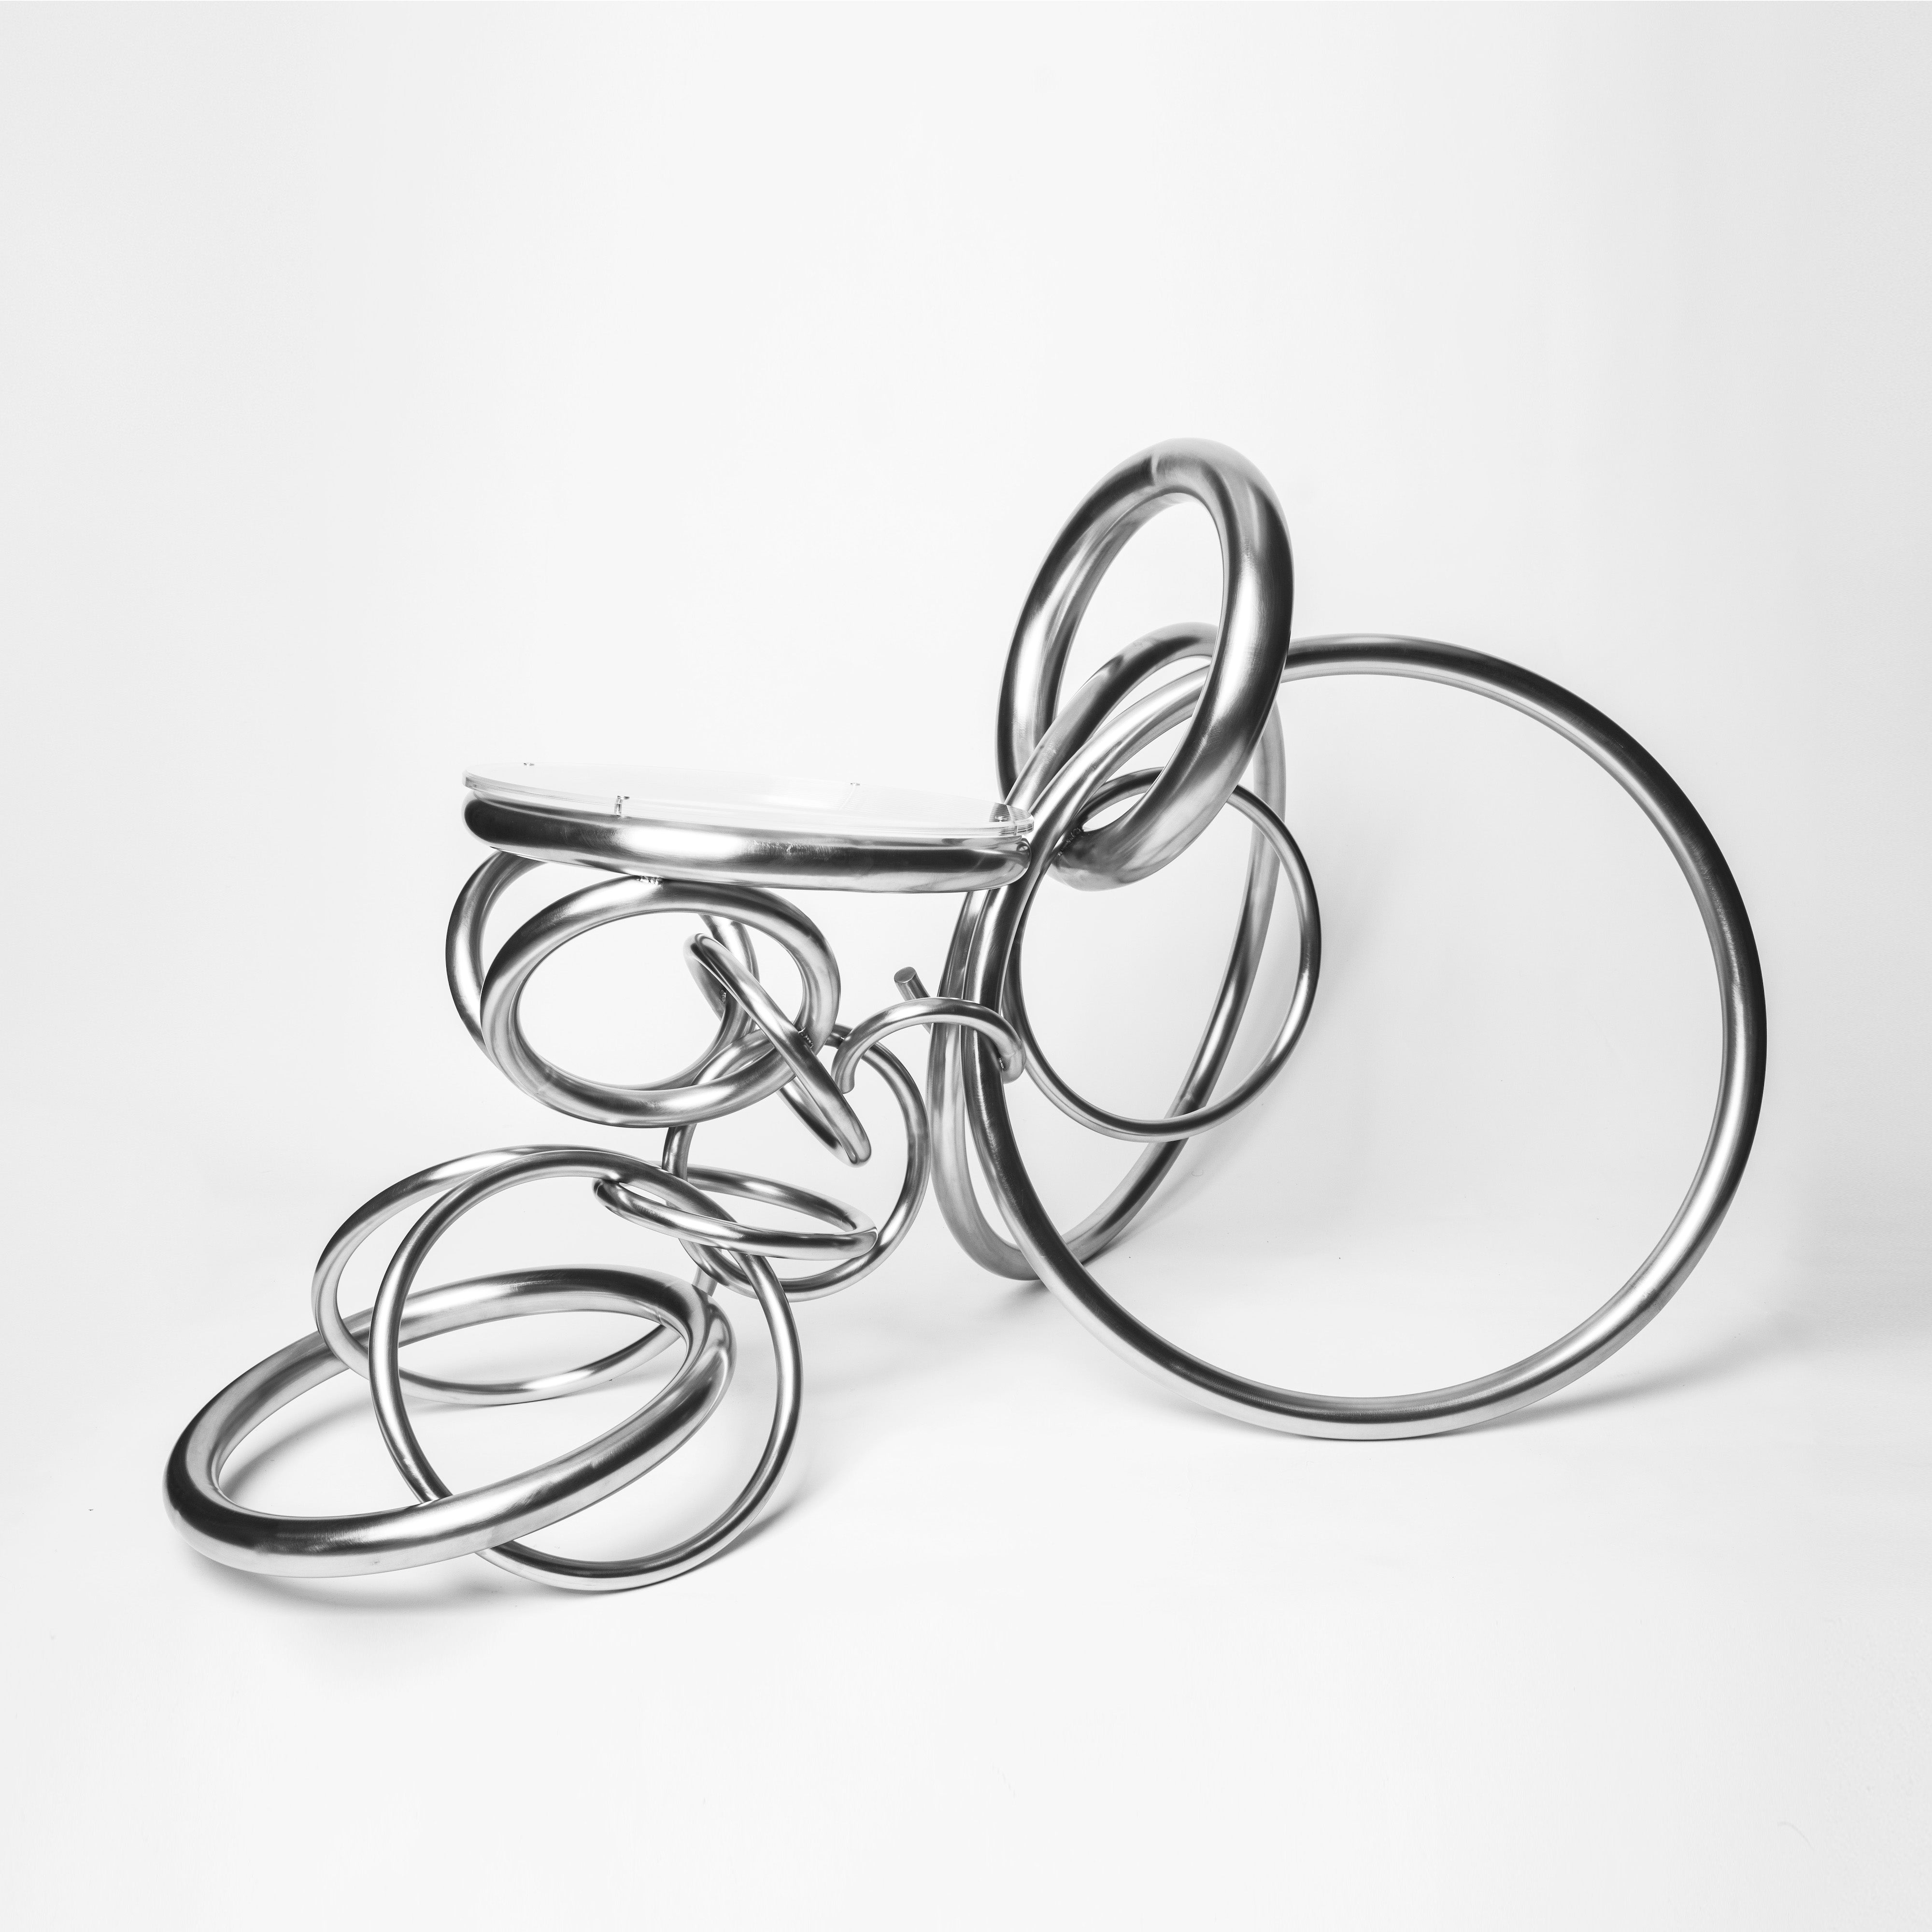 O-RING CHAIR IV, 2023